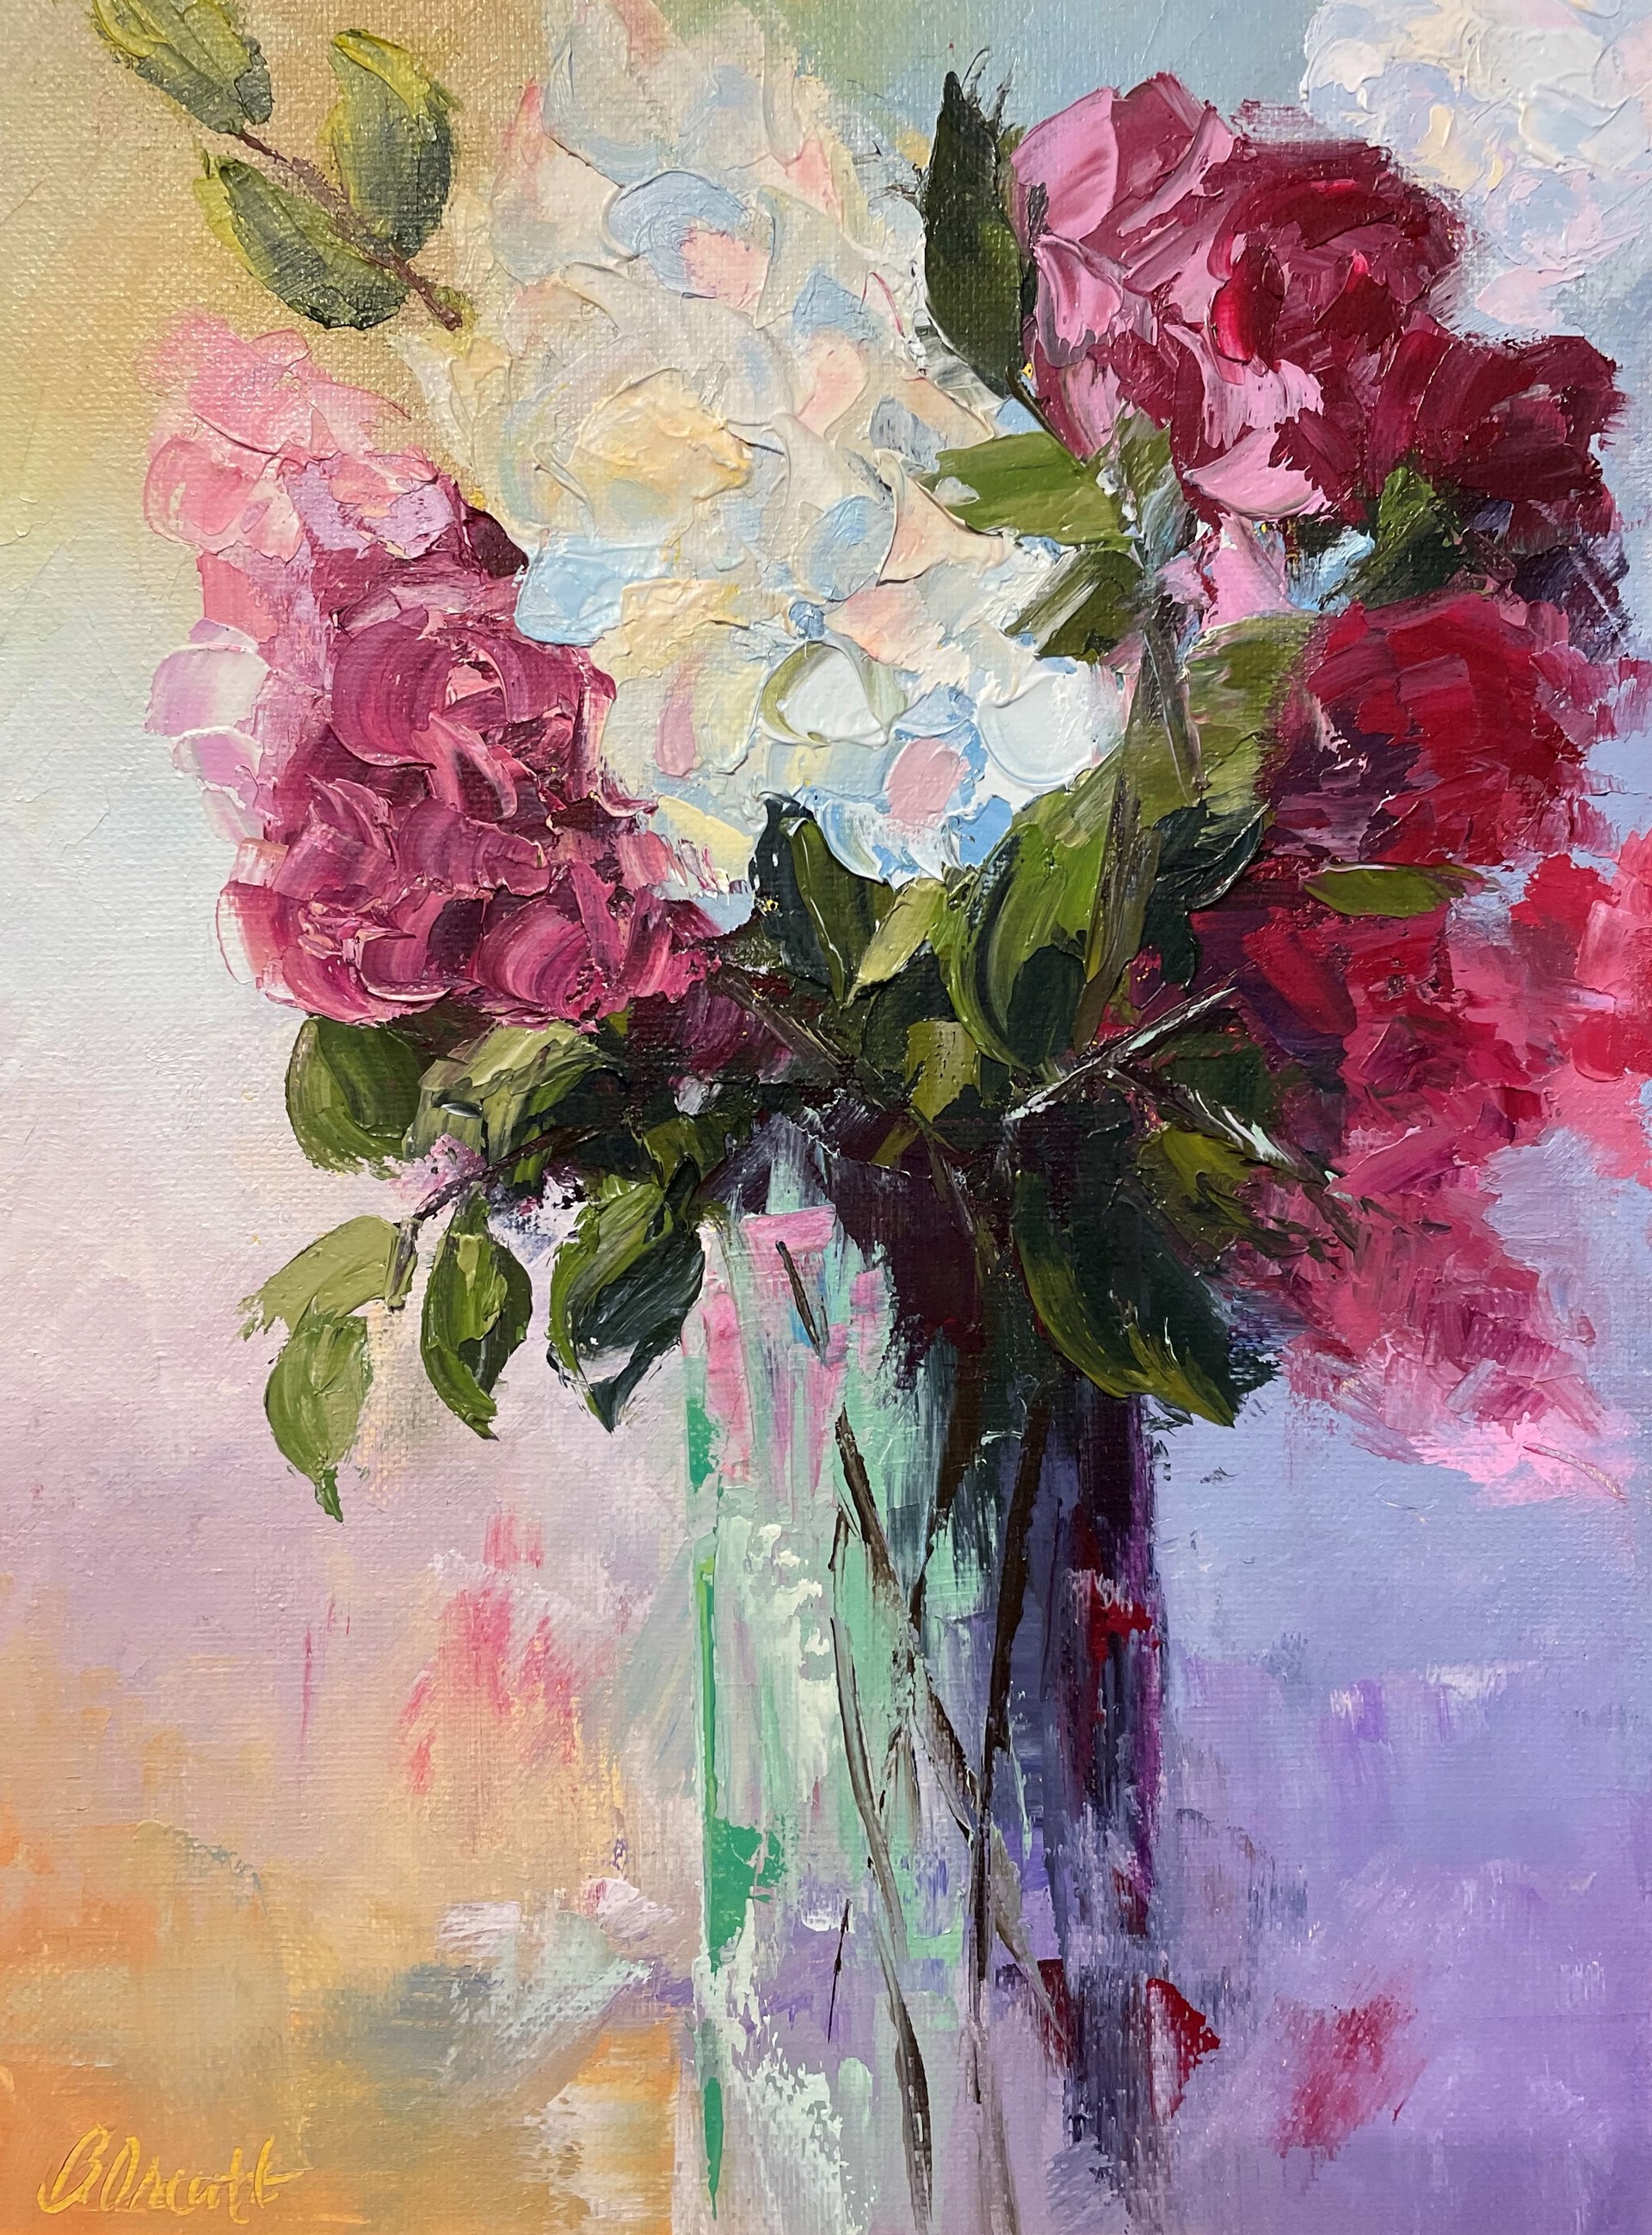 Crepe Myrtles by Brenda Orcutt